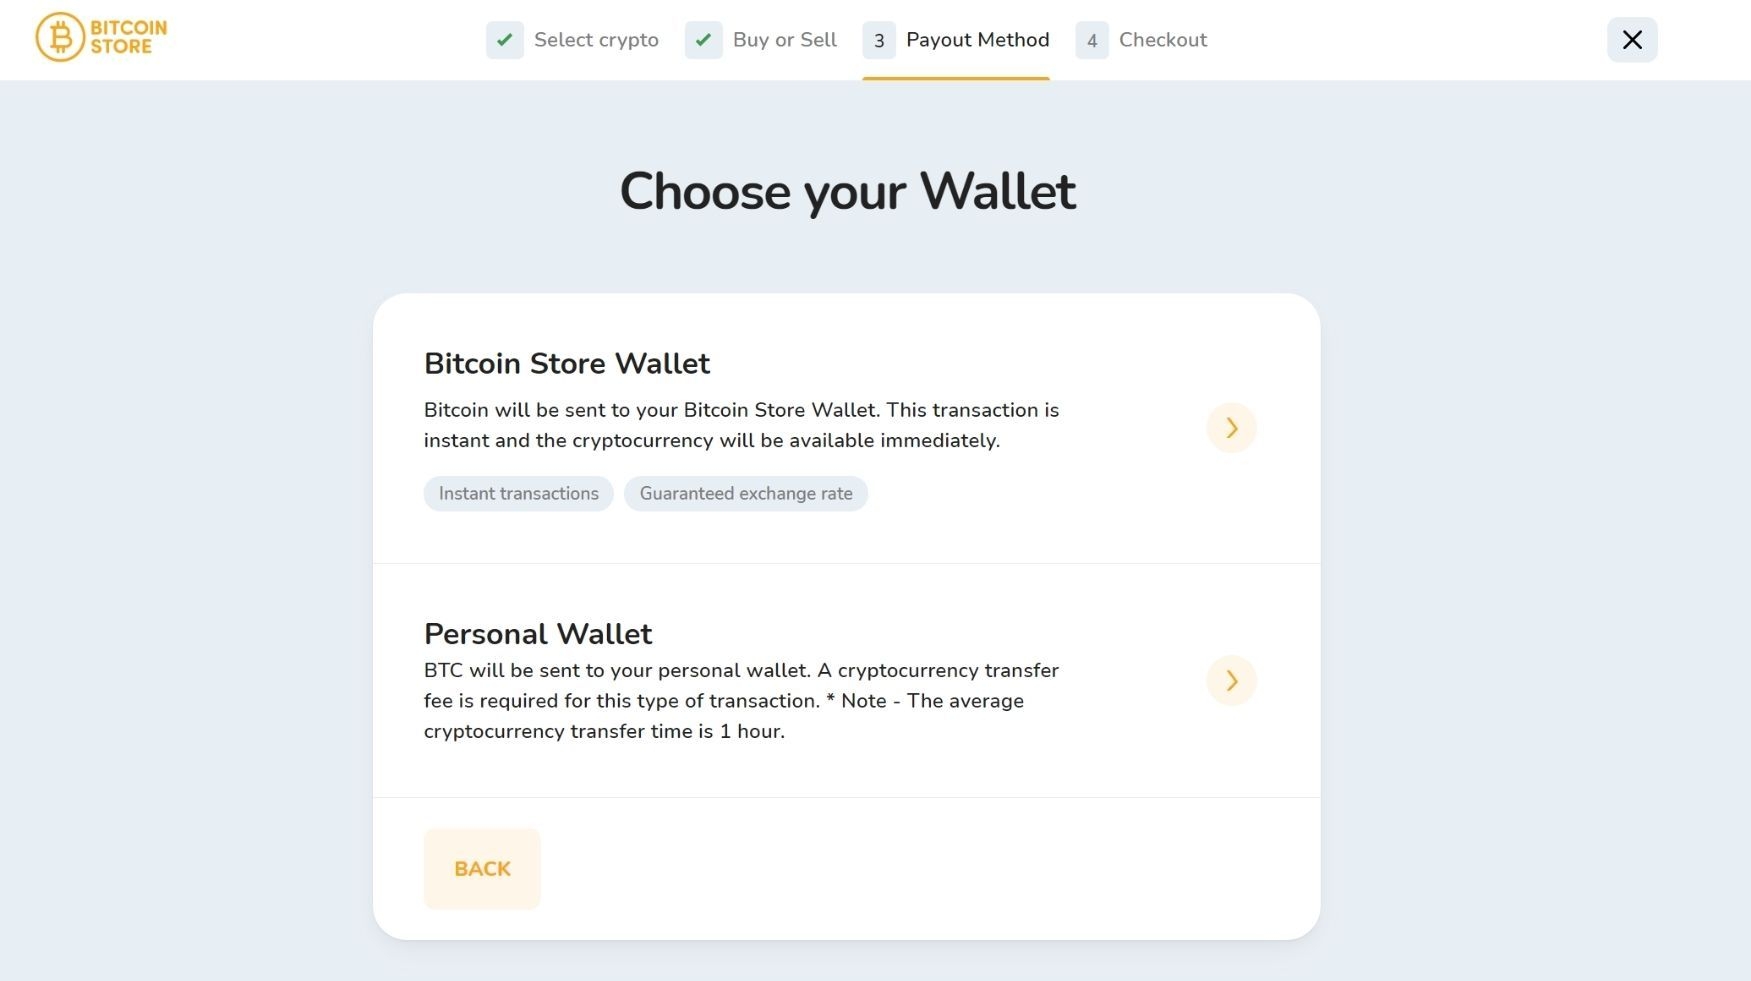 The window for selecting the wallet as a payout method on the Bitcoin Store platform.